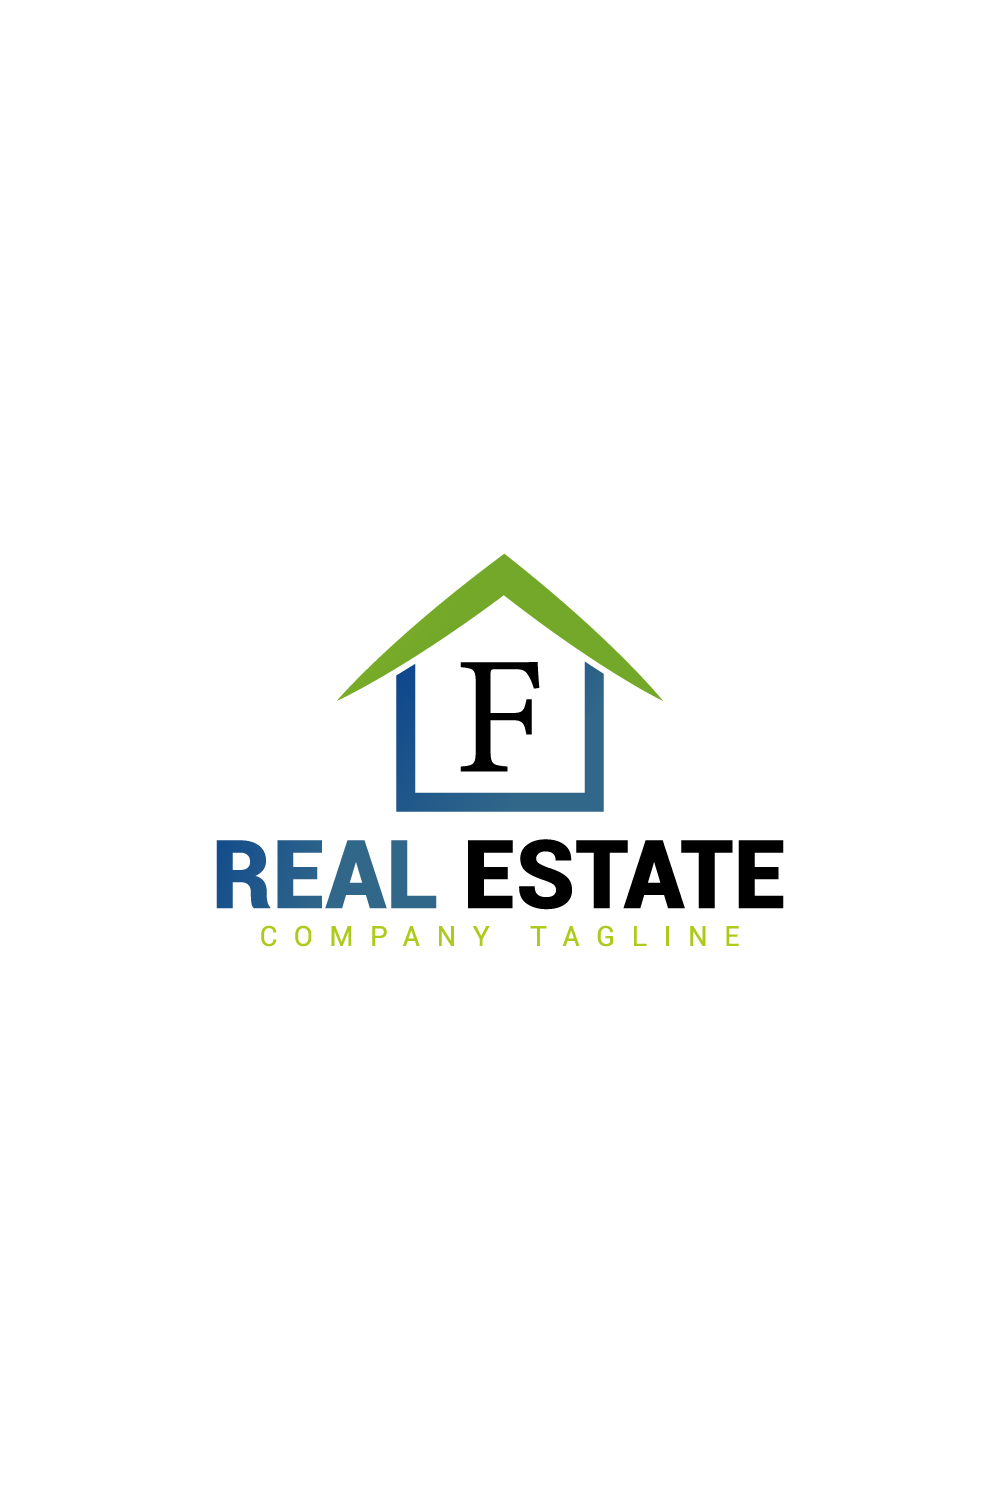 Real estate logo with green, dark blue color and F letter pinterest preview image.